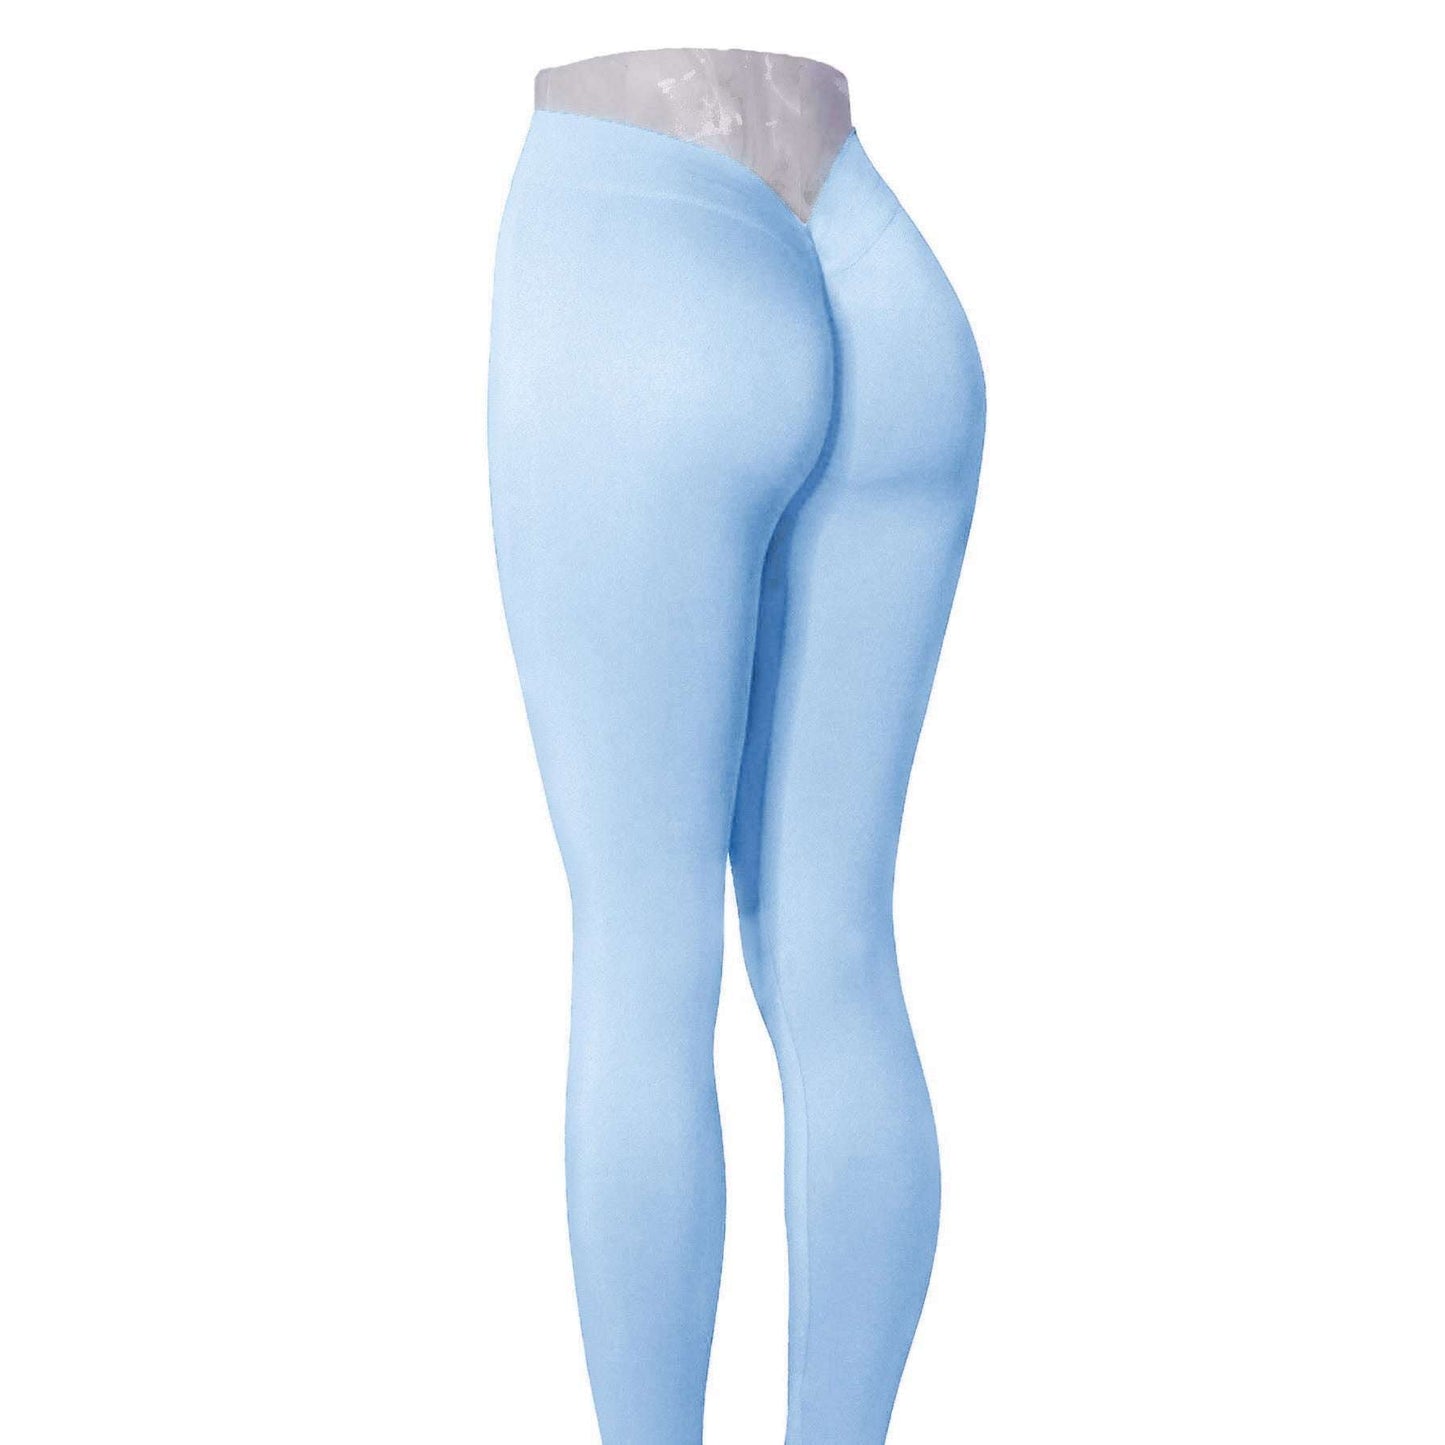 Durable Gym Wear, Flexible Fitness Leggings, Moisture-Wicking Yoga Pants - available at Sparq Mart